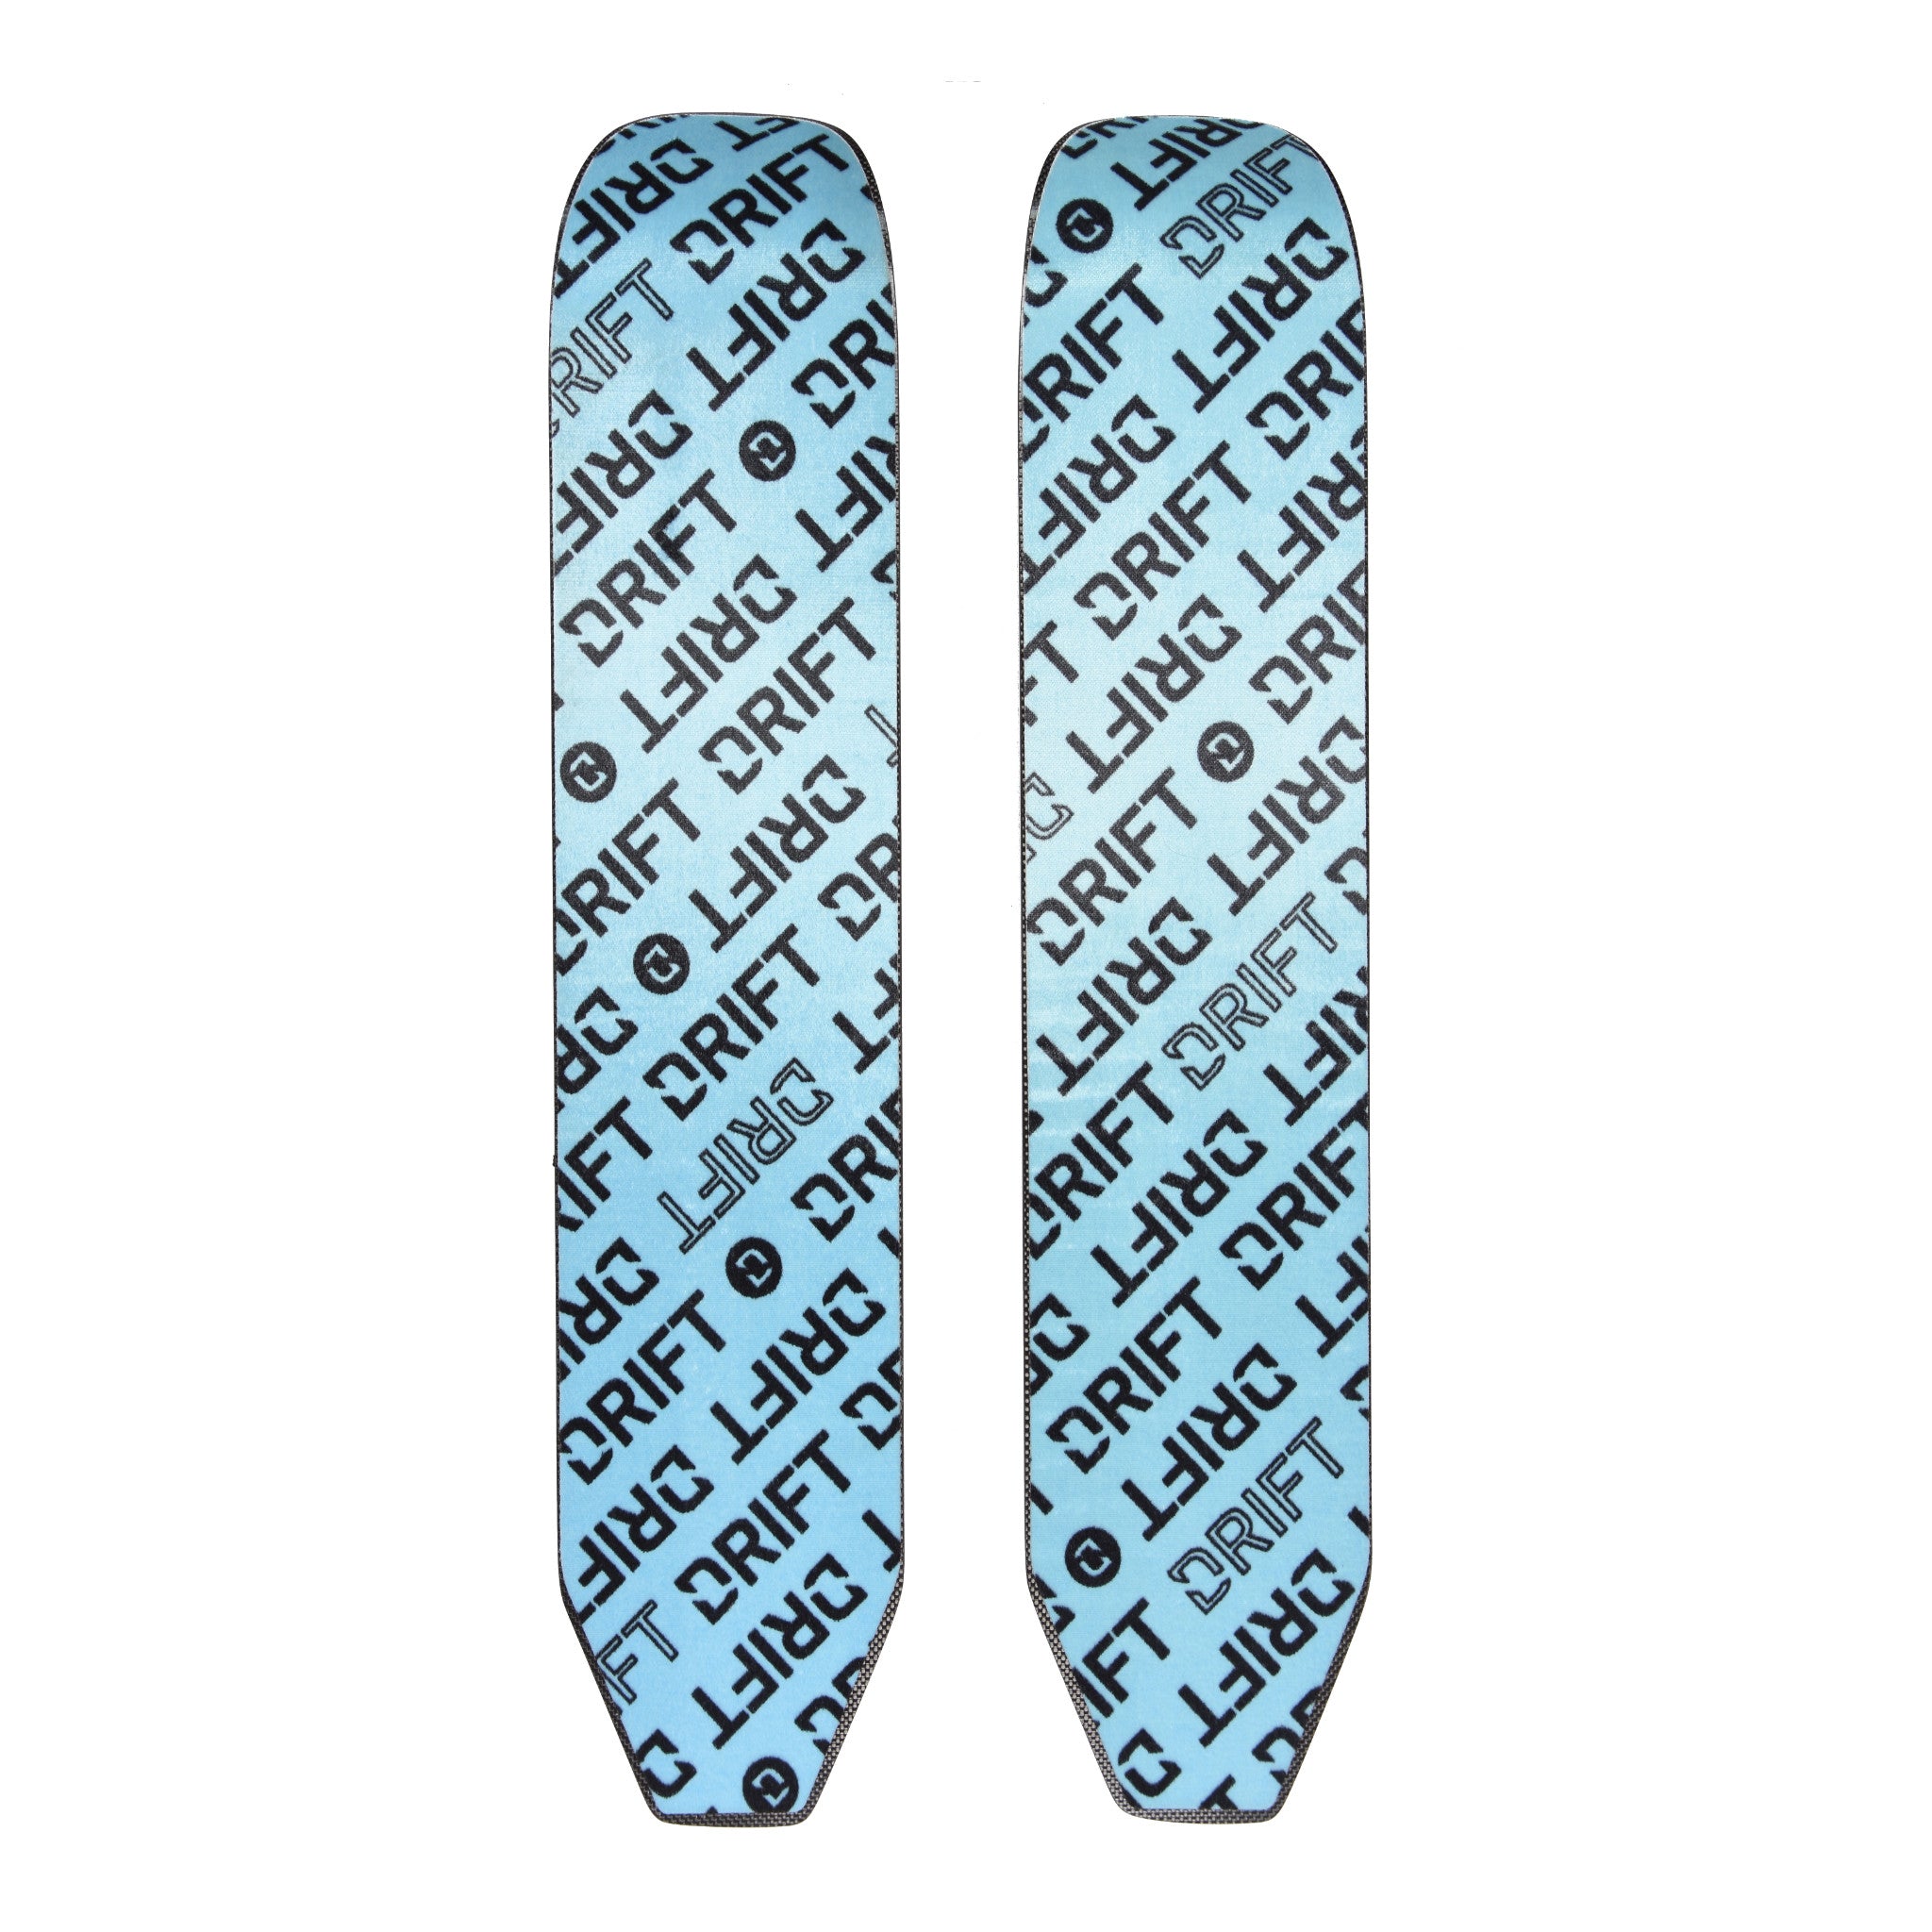 Drift Boards - Snowshoe for Snowboarders and Backcountry Travel – Drift  Products